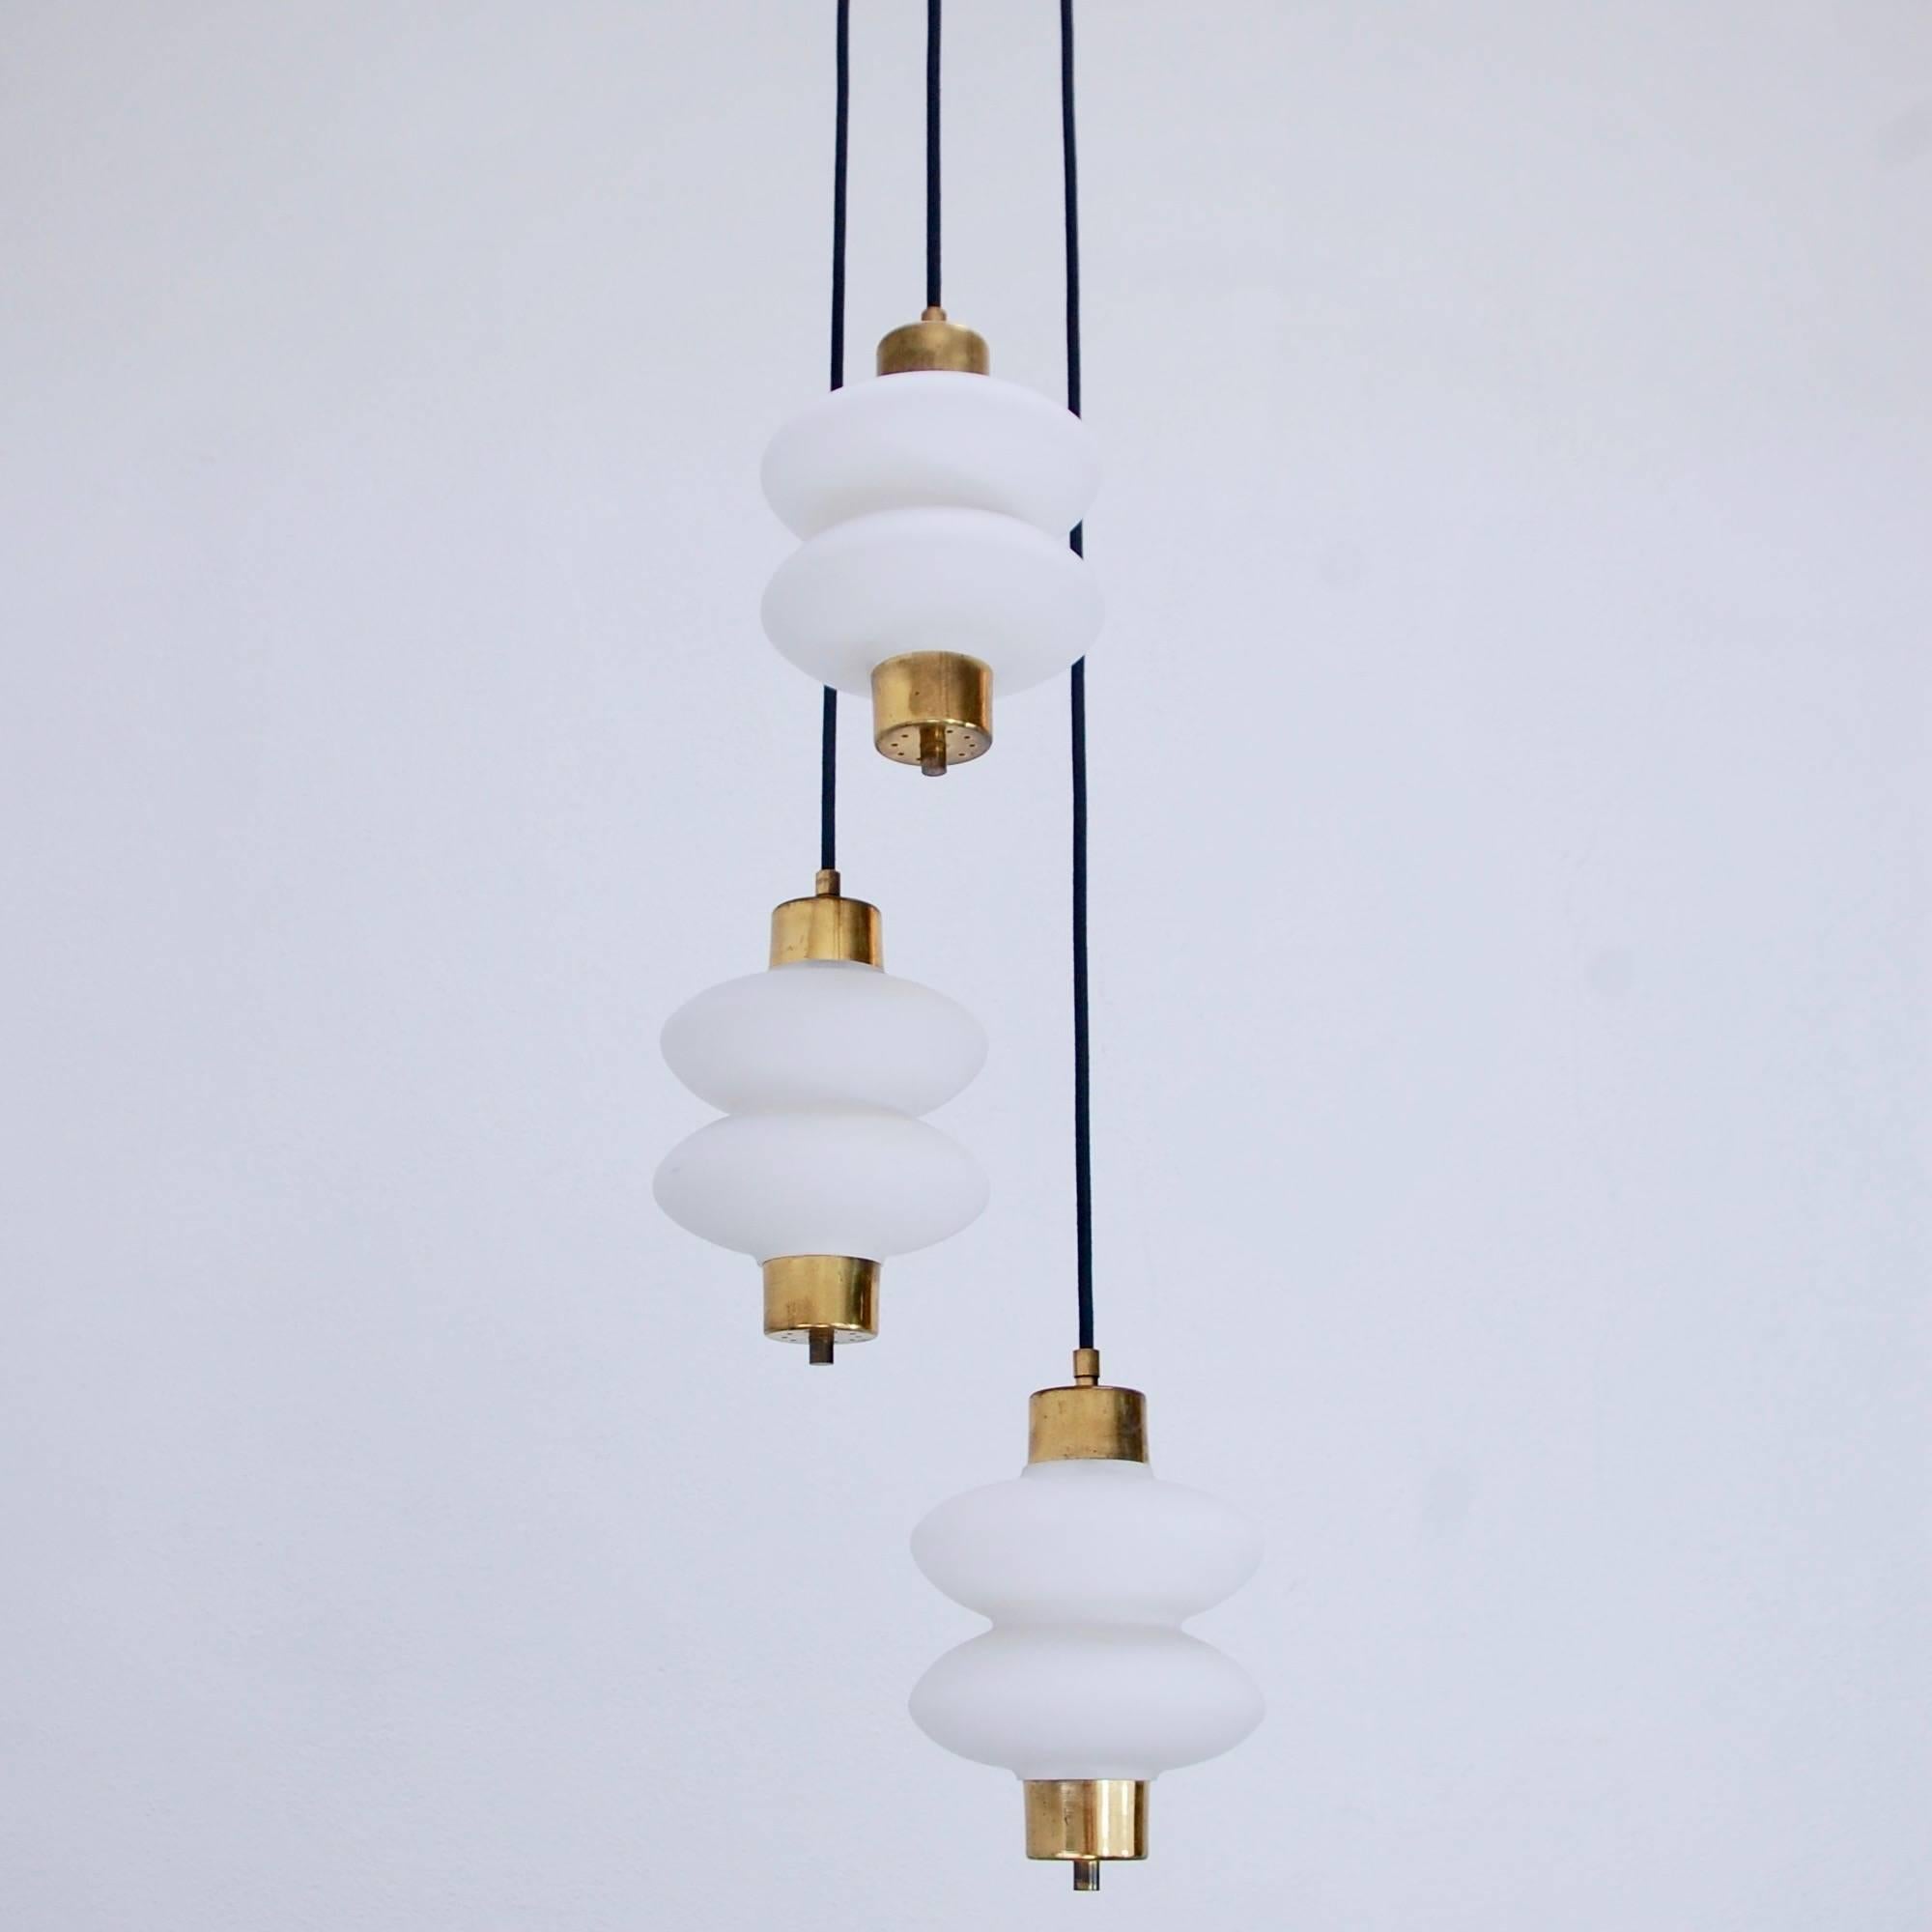 Of the period tiered three-glass shade midcentury pendant chandelier from Italy. Partially restored, original brass finish, single E26 medium based socket per shade, wired for the US. Overall drop adjustable upon request.
Measures: 11” H x 7” W